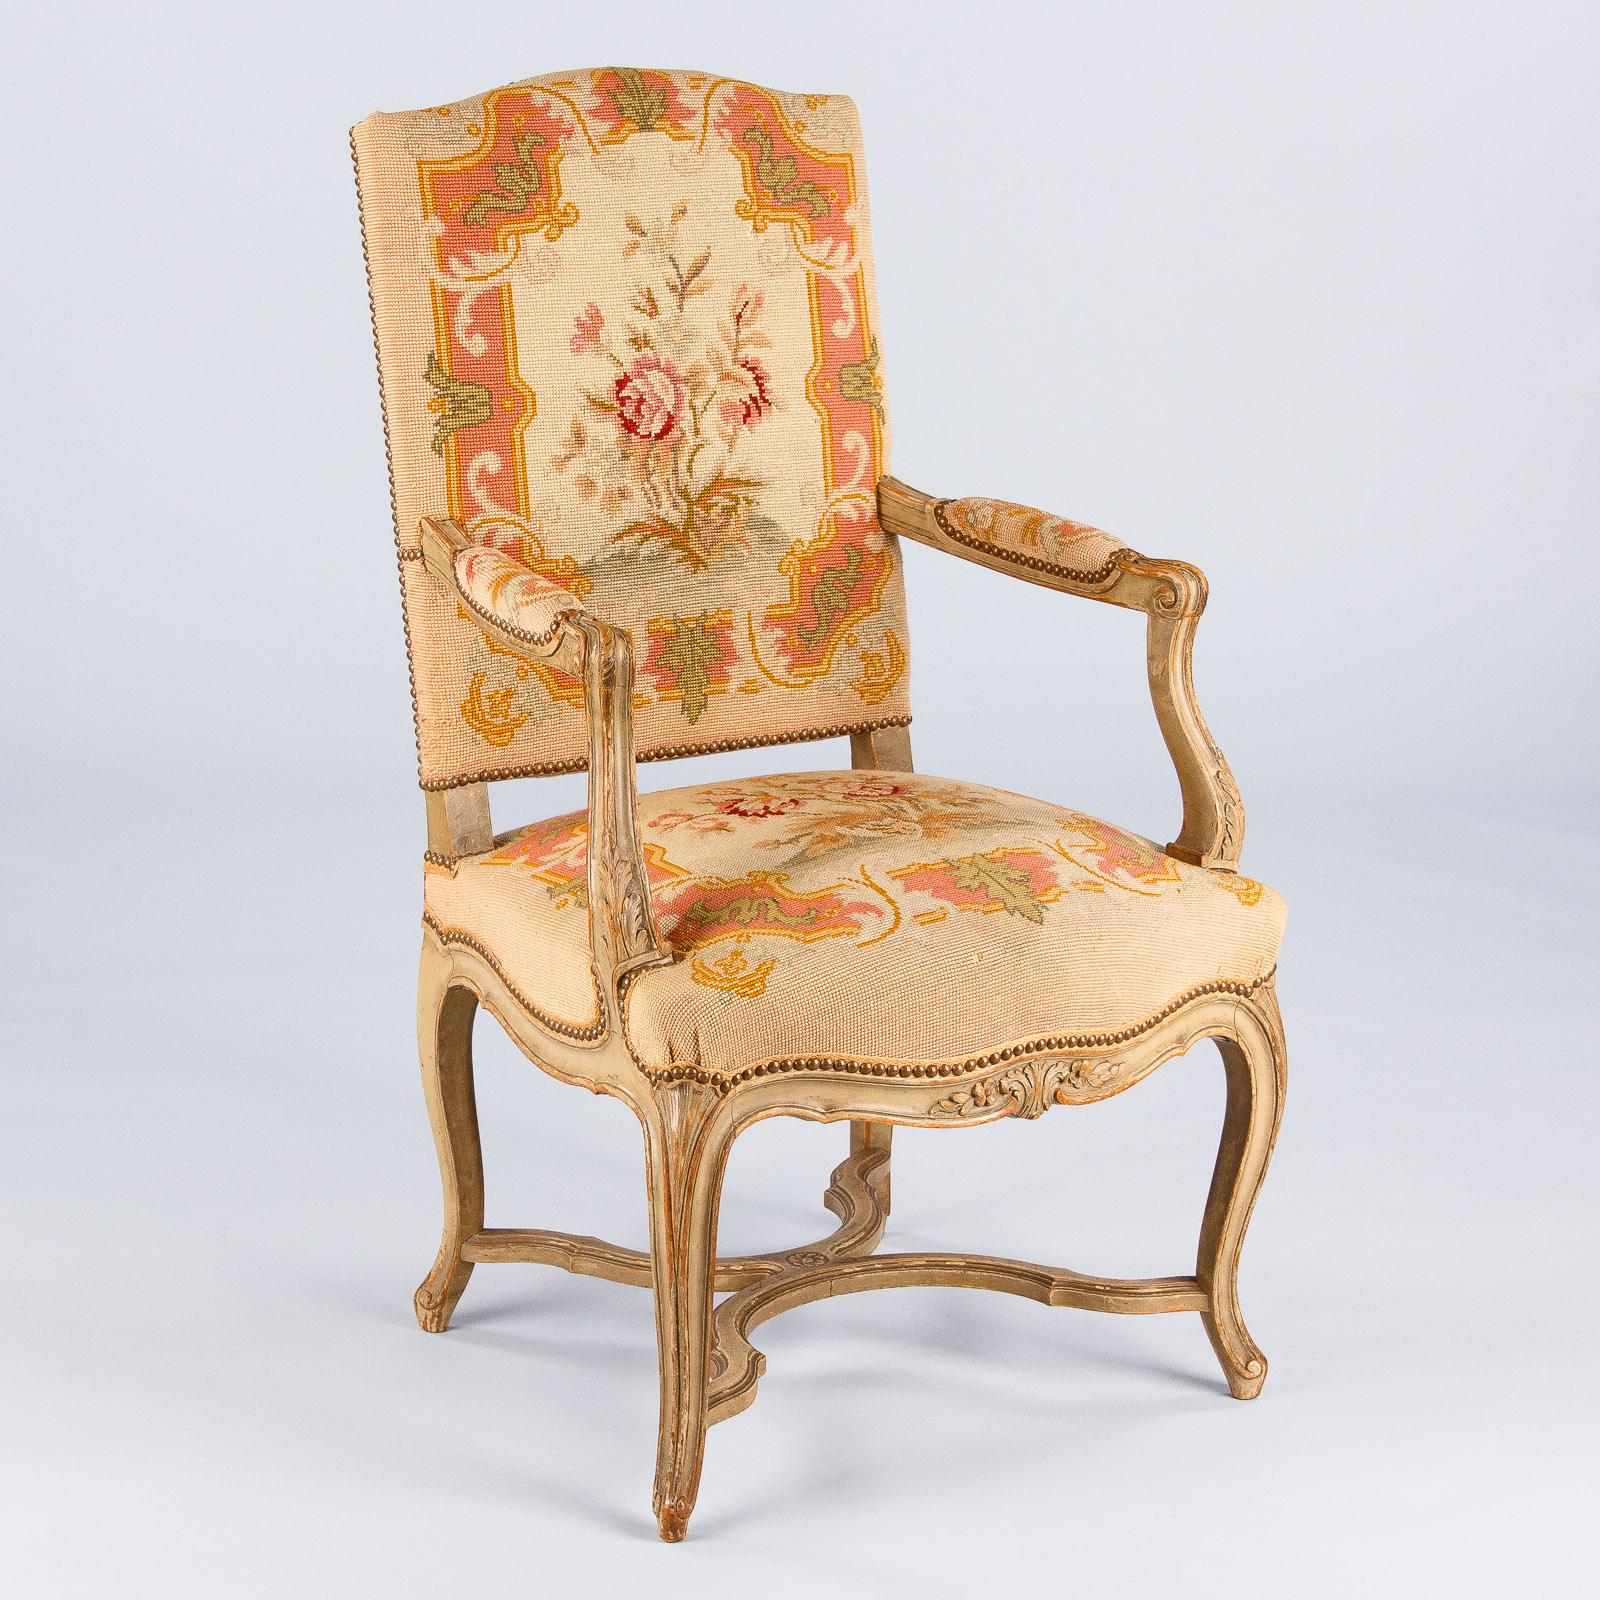 20th Century Pair of French Louis XV Style Painted Armchairs, circa 1920s